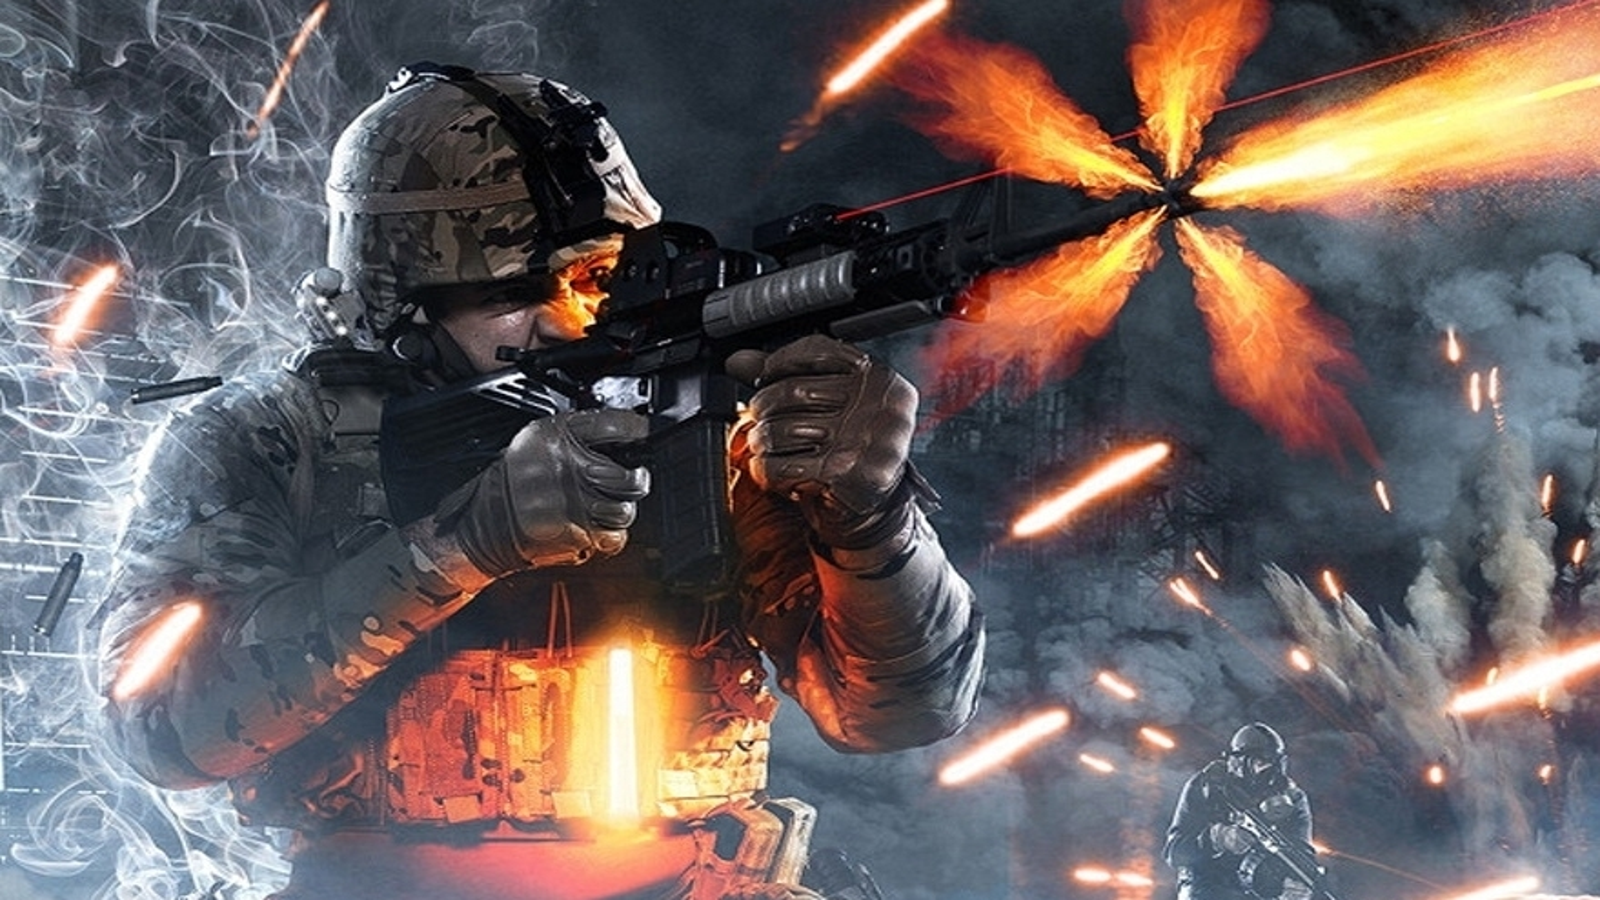 Battlefield 4 server capacity increased to deal with players hyped